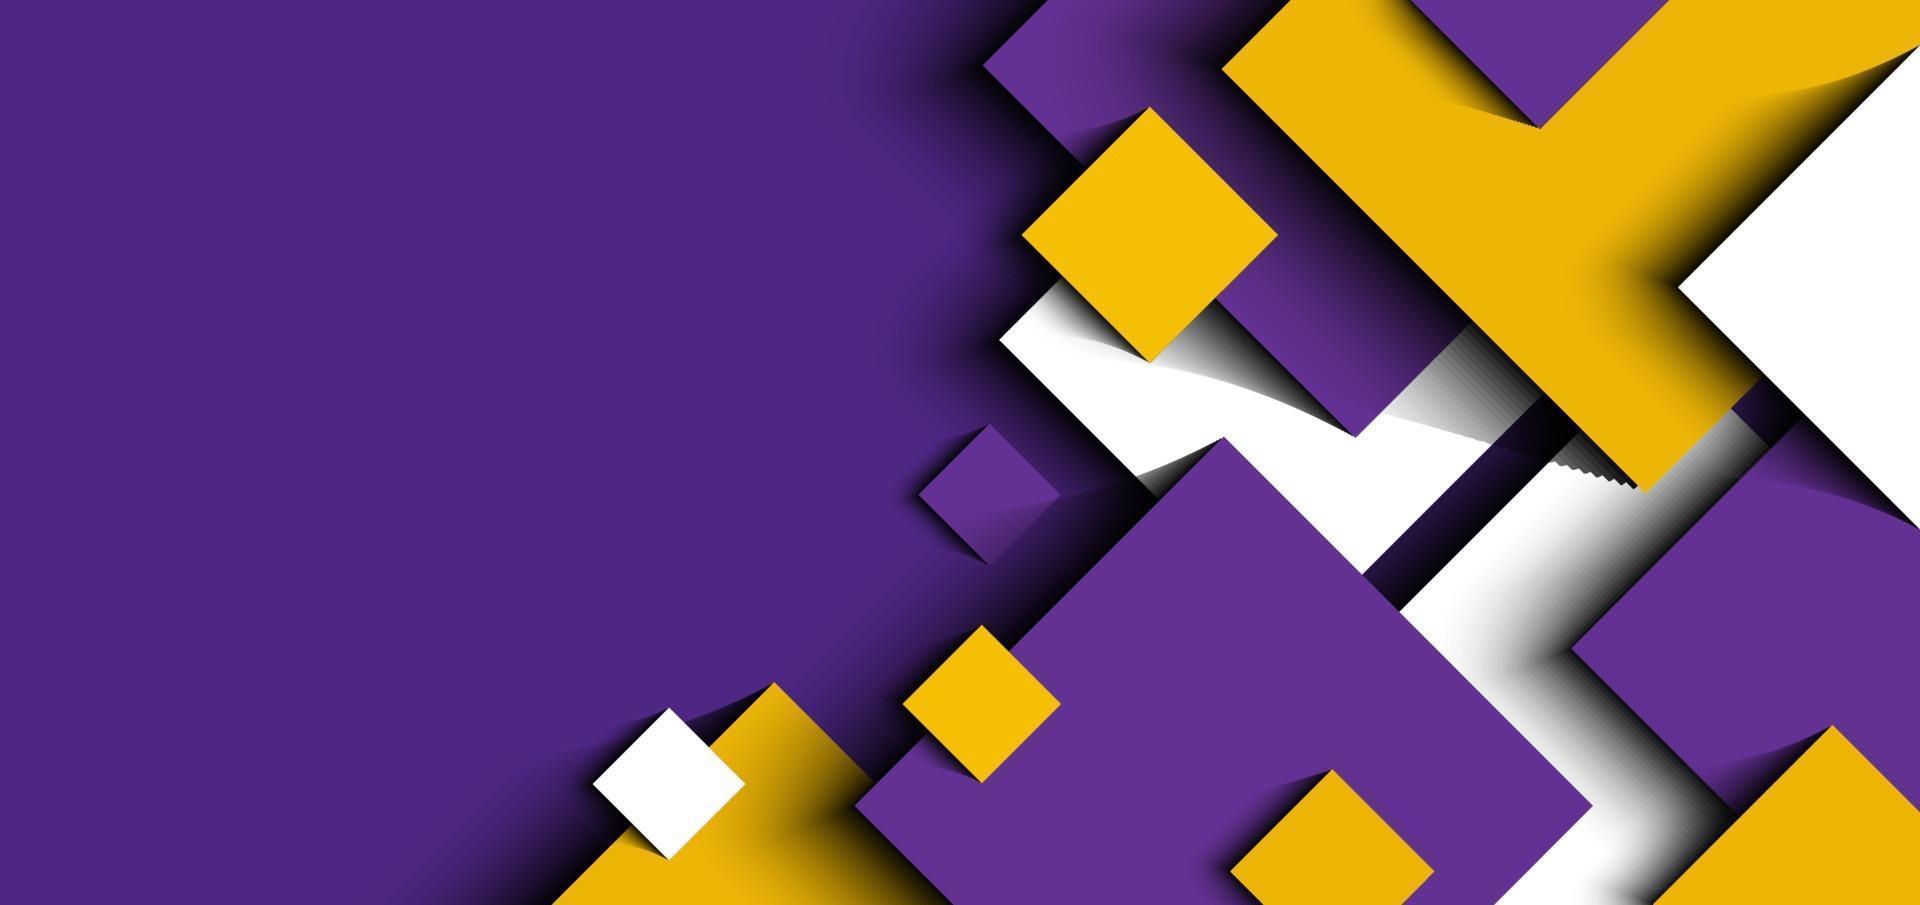 Abstract background 3D purple, yellow, white geometric squares shape